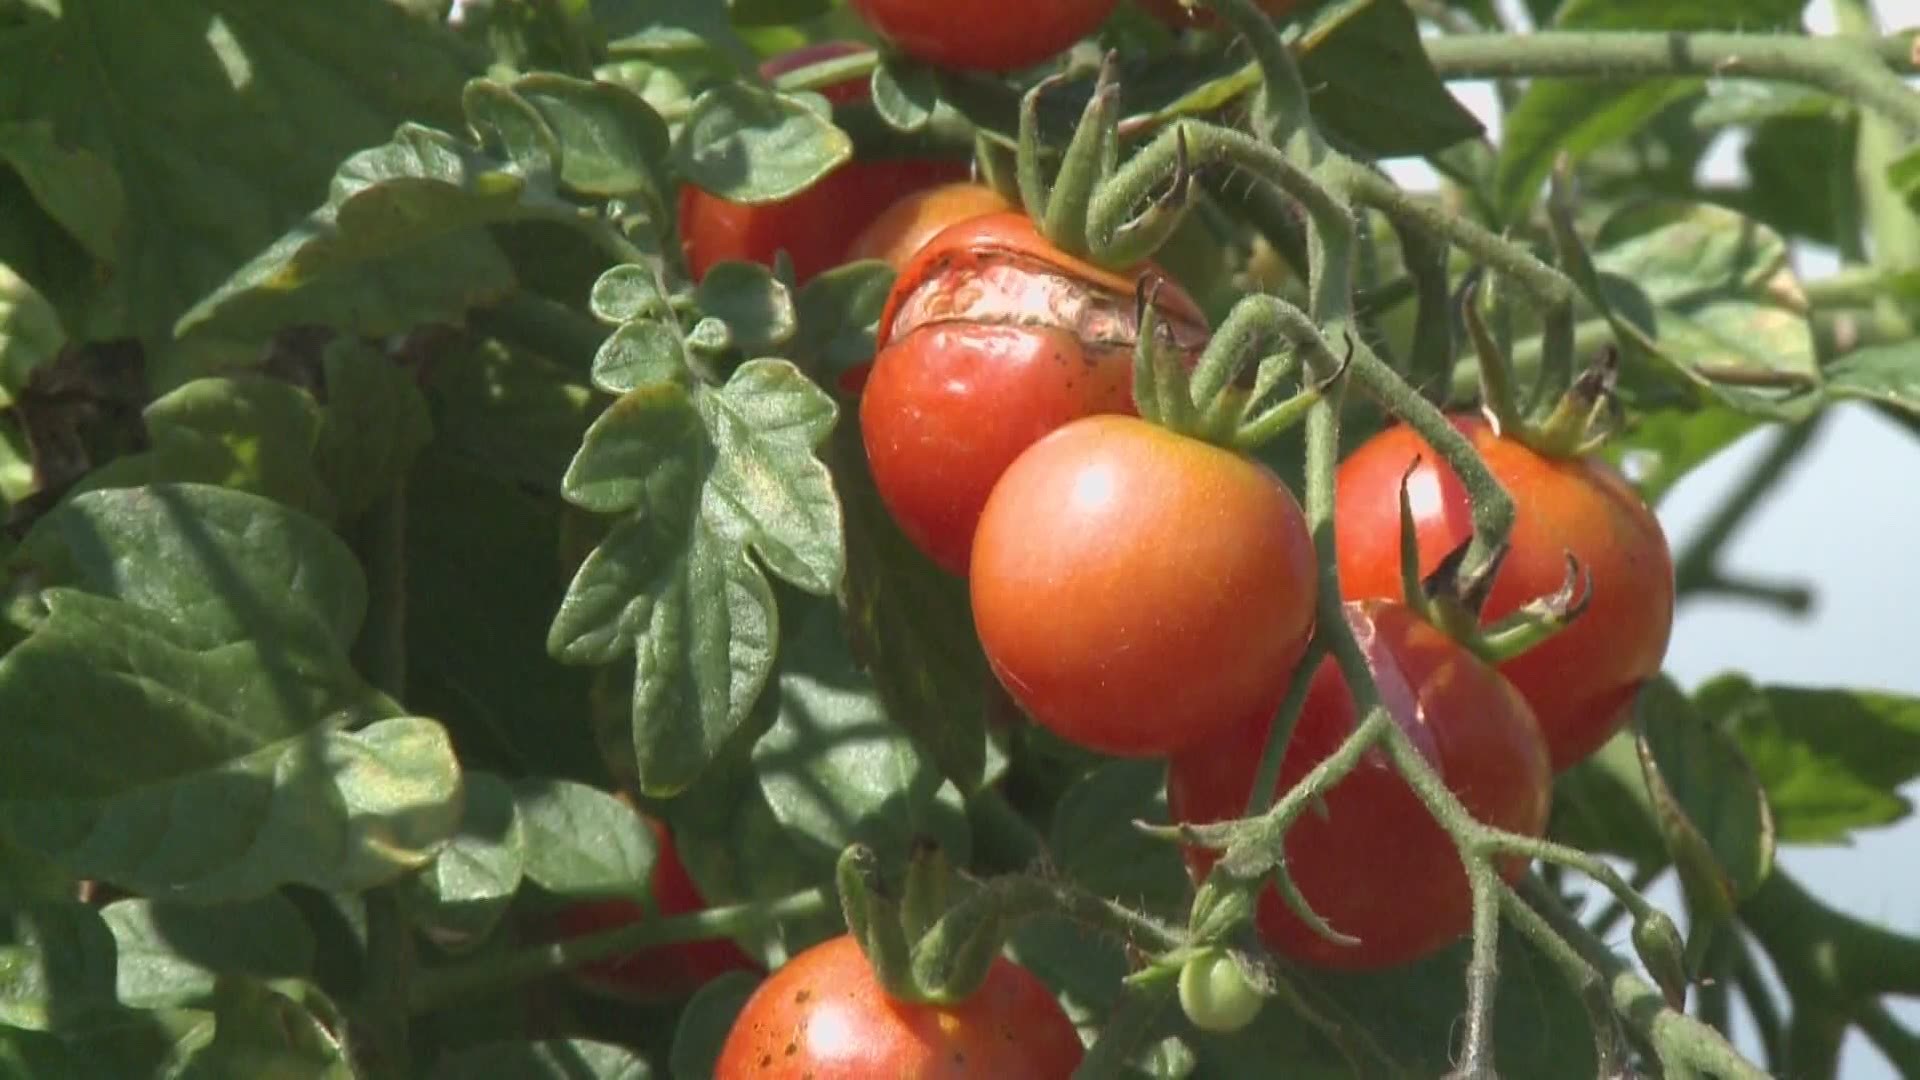 This marks the 7th consecutive year that the "One Tomato Project" is being held, and it will be offered in Aroostook County for the first time in 2021.